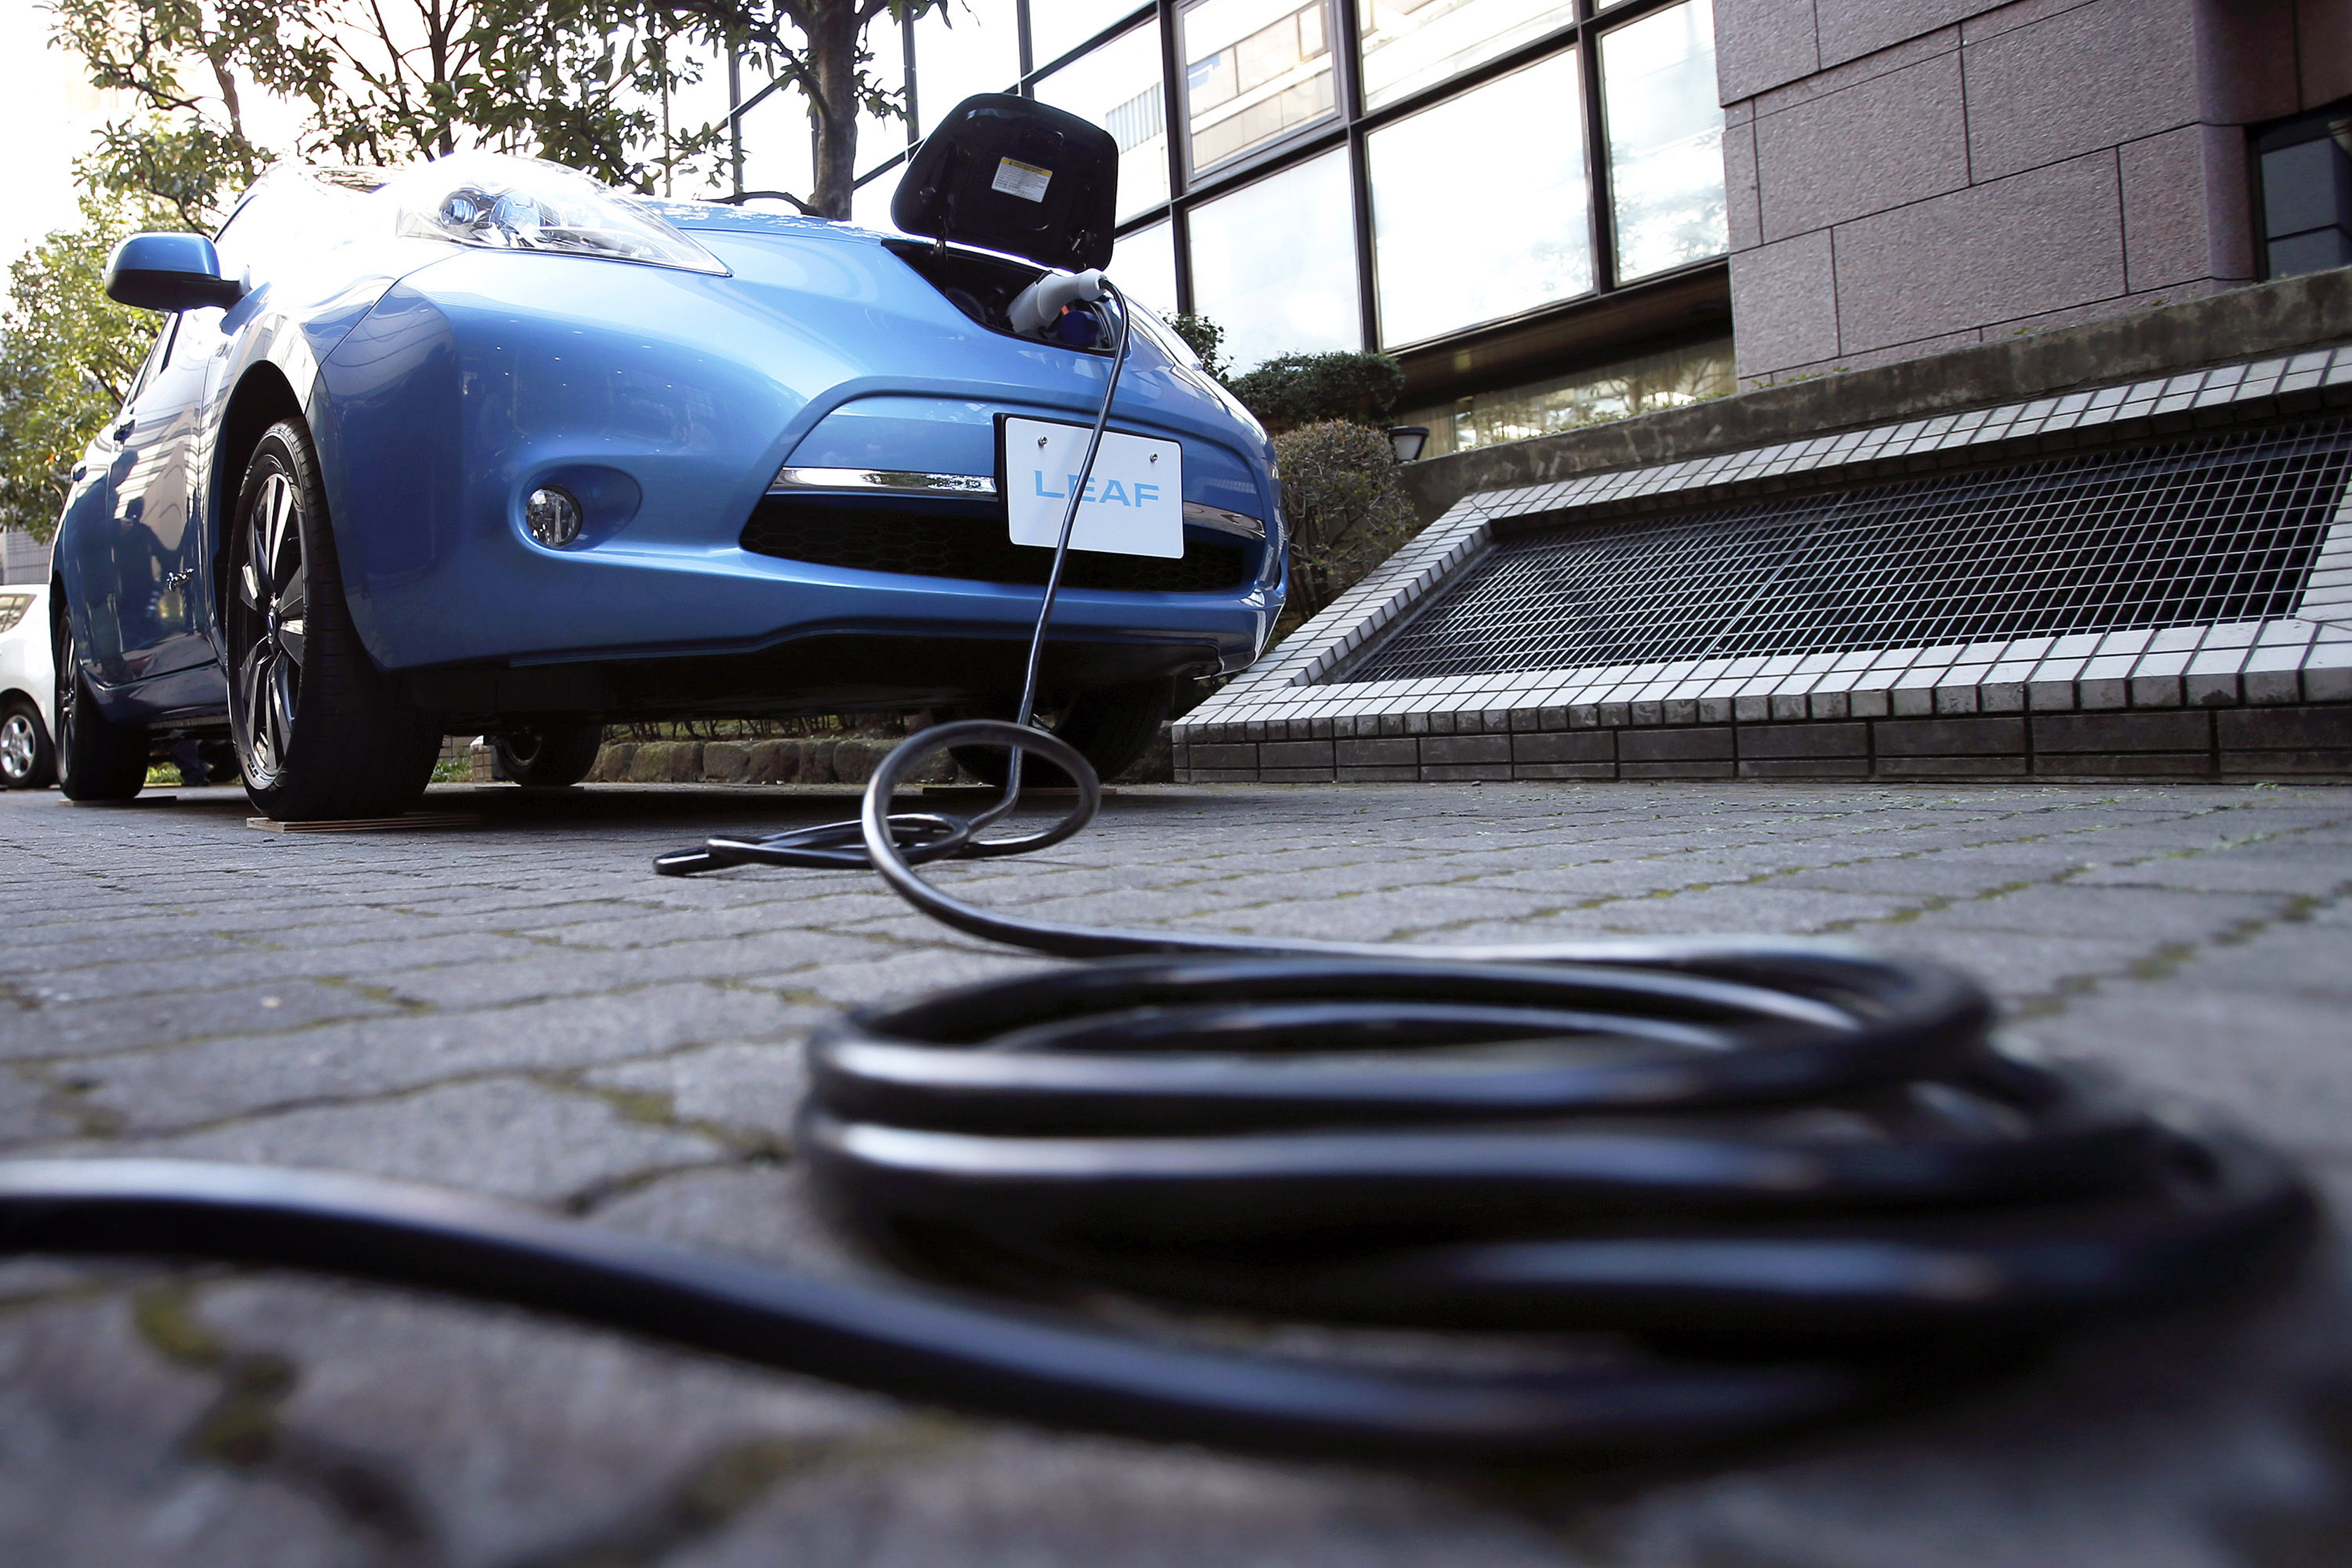 An electric charging cable is seen connected to the updated Nissan Leaf vehicle during a news conference in Japan, Tokyo, on Tuesday, Nov. 20, 2012.